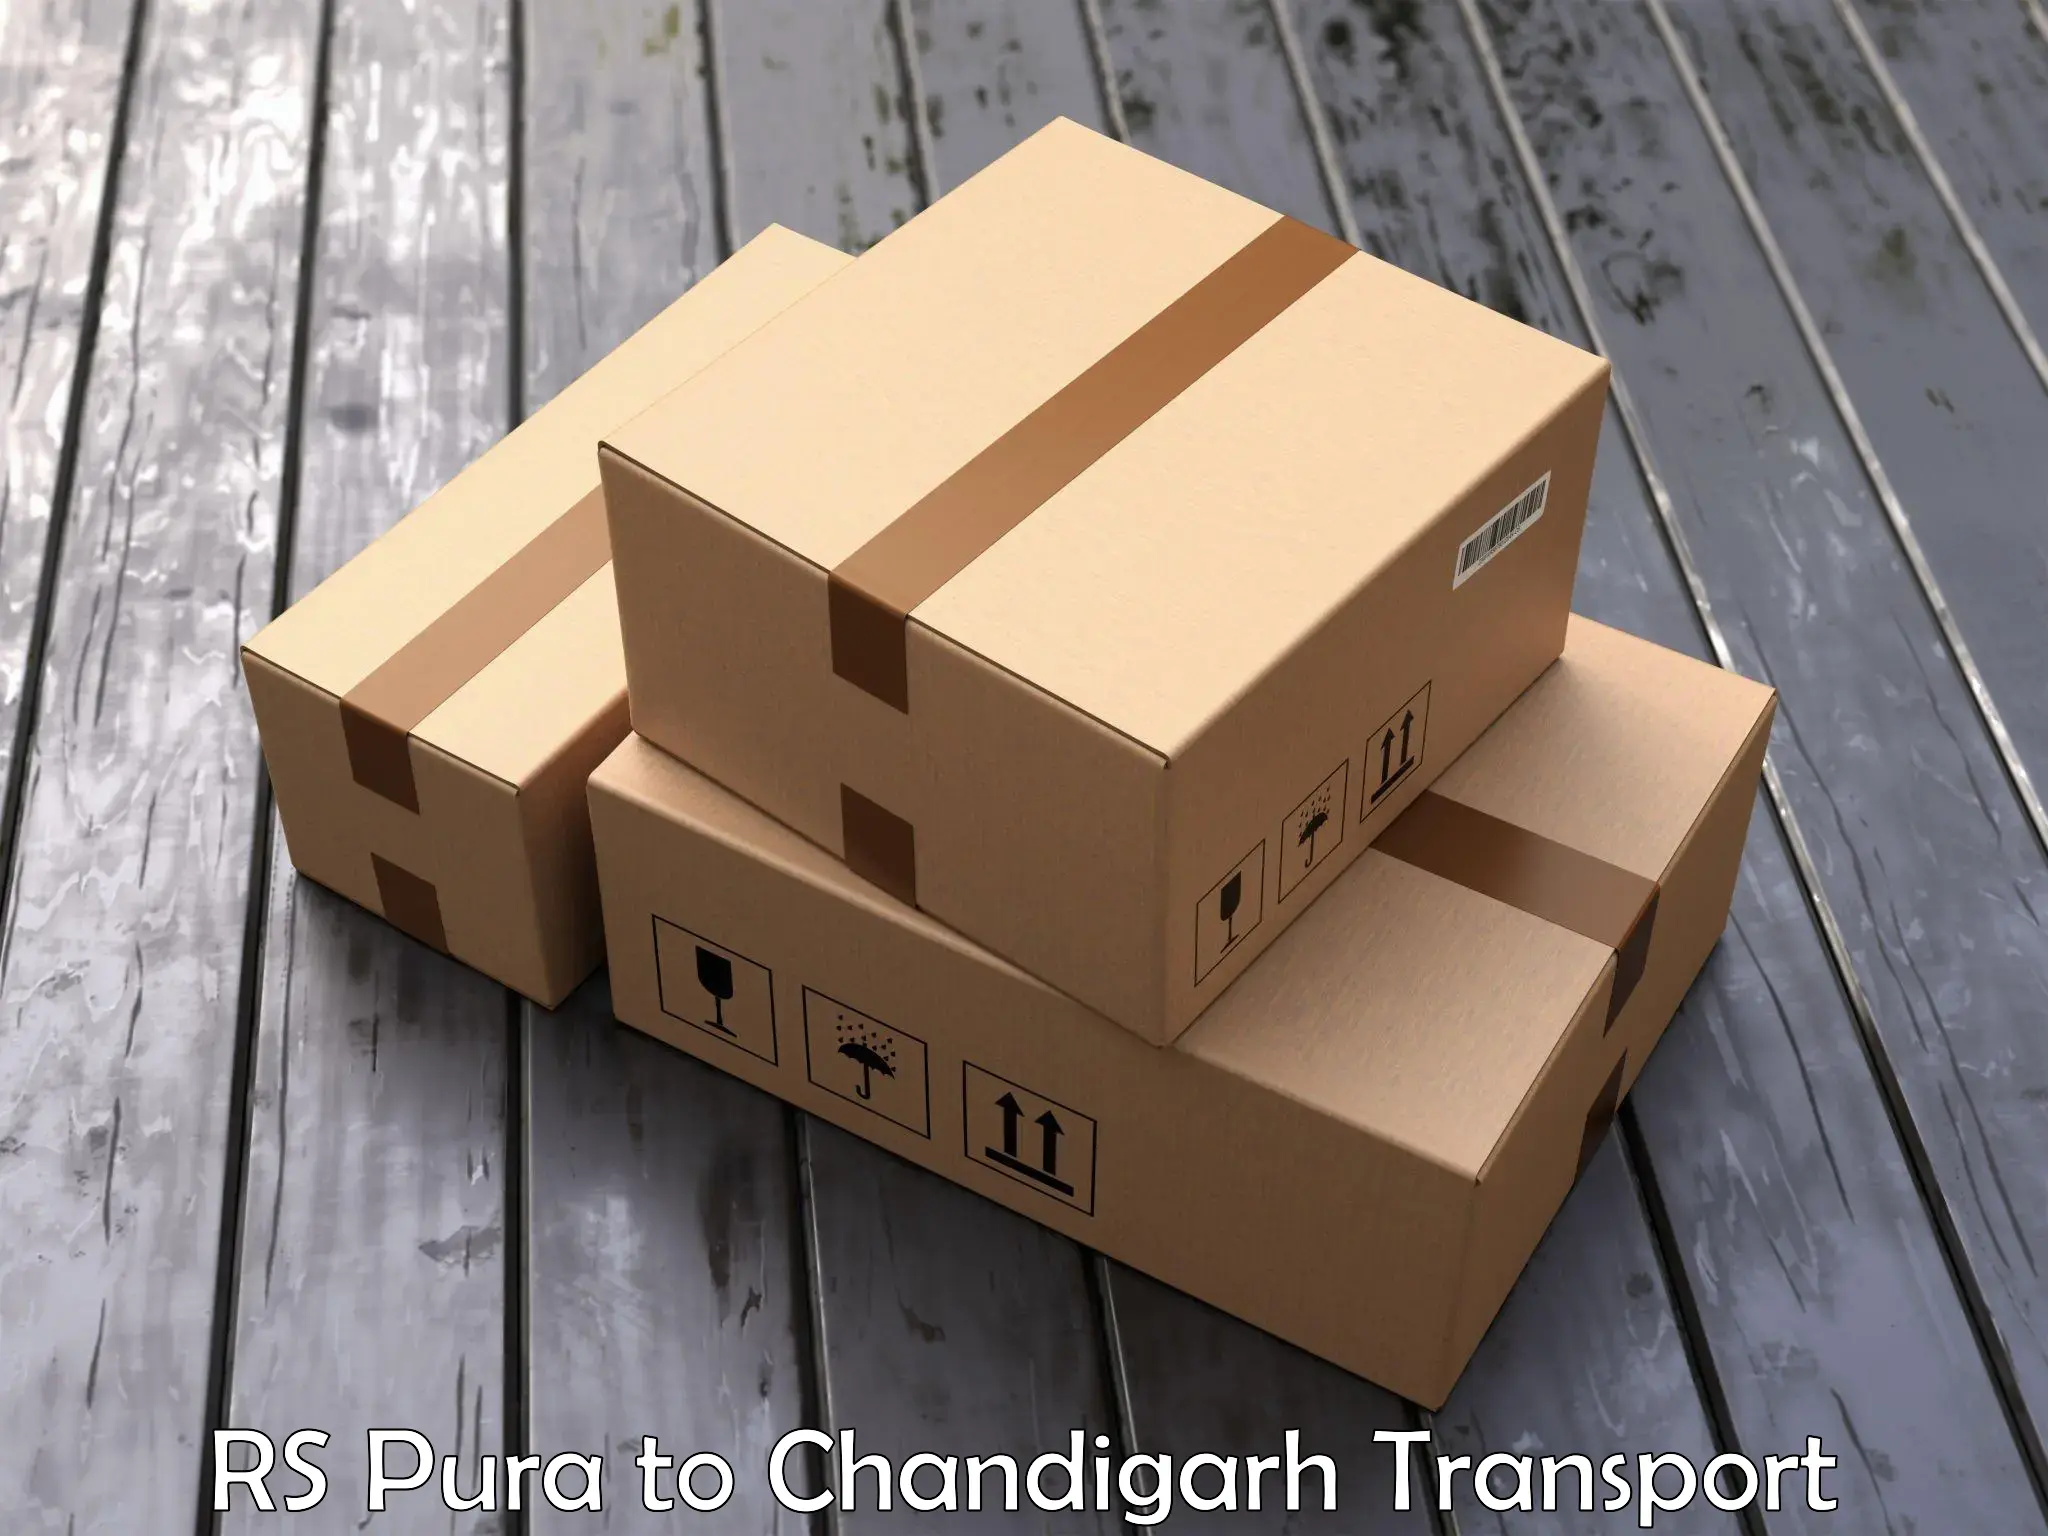 Vehicle transport services RS Pura to Chandigarh